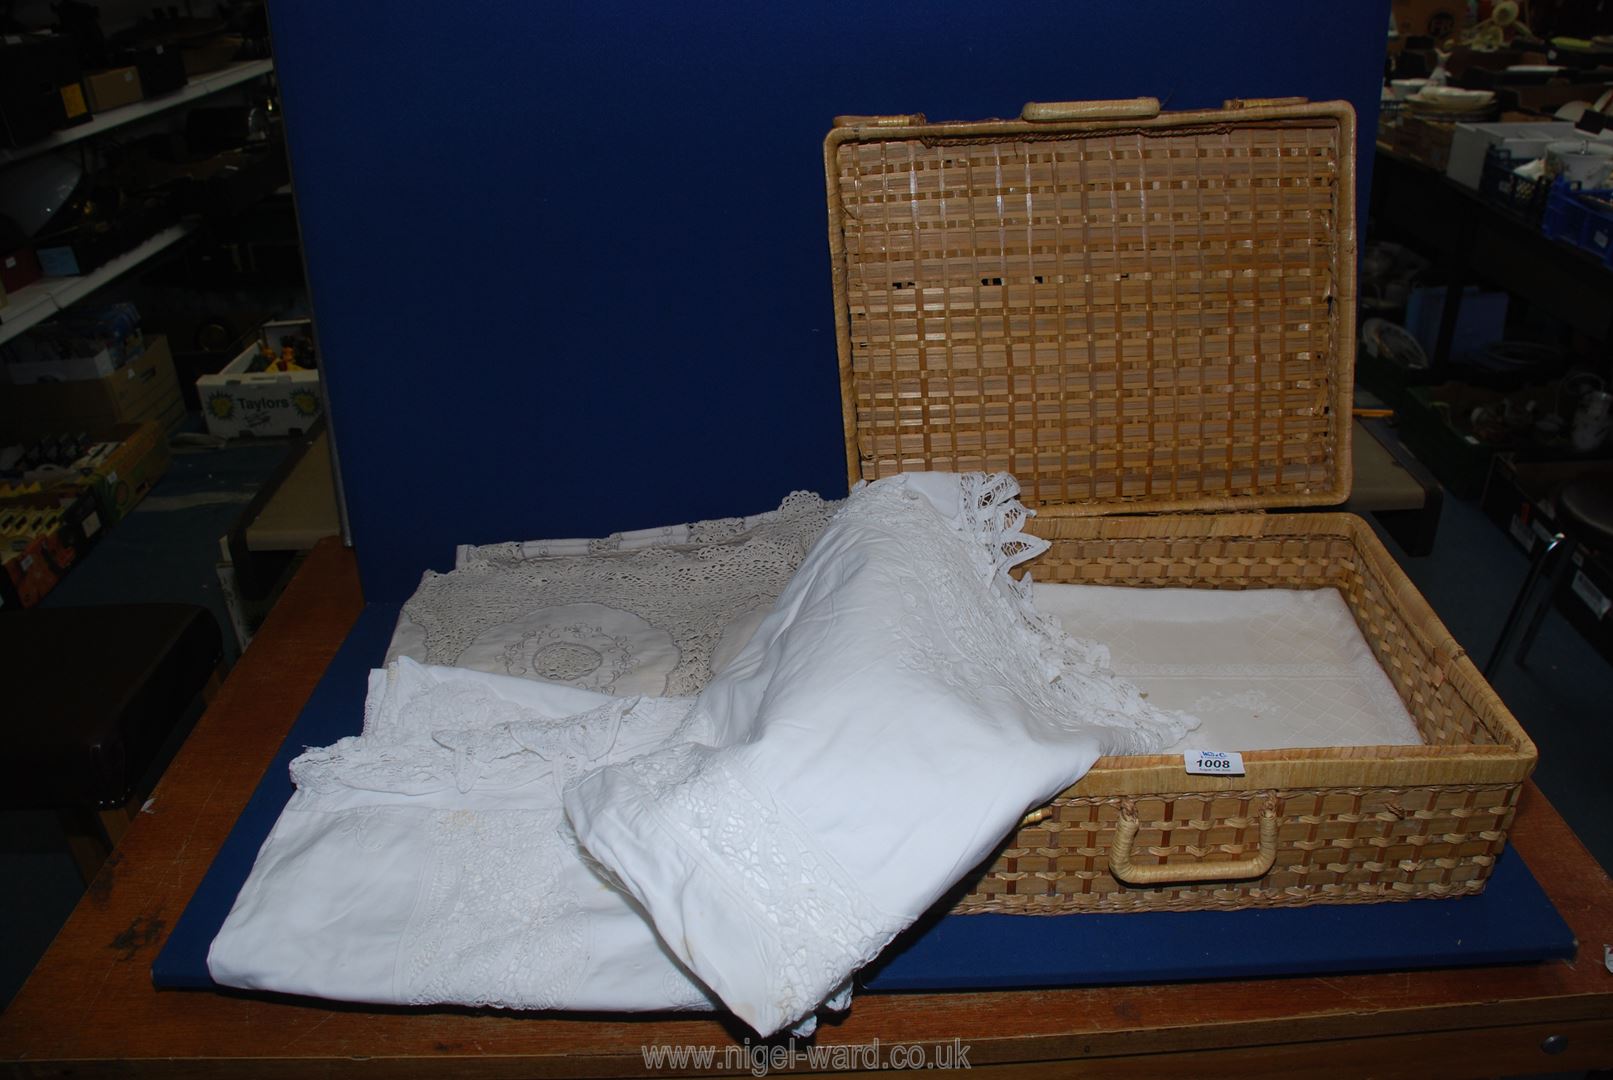 Five large vintage linen tablecloths, some having embroidery or lace edges, etc., in picnic basket.